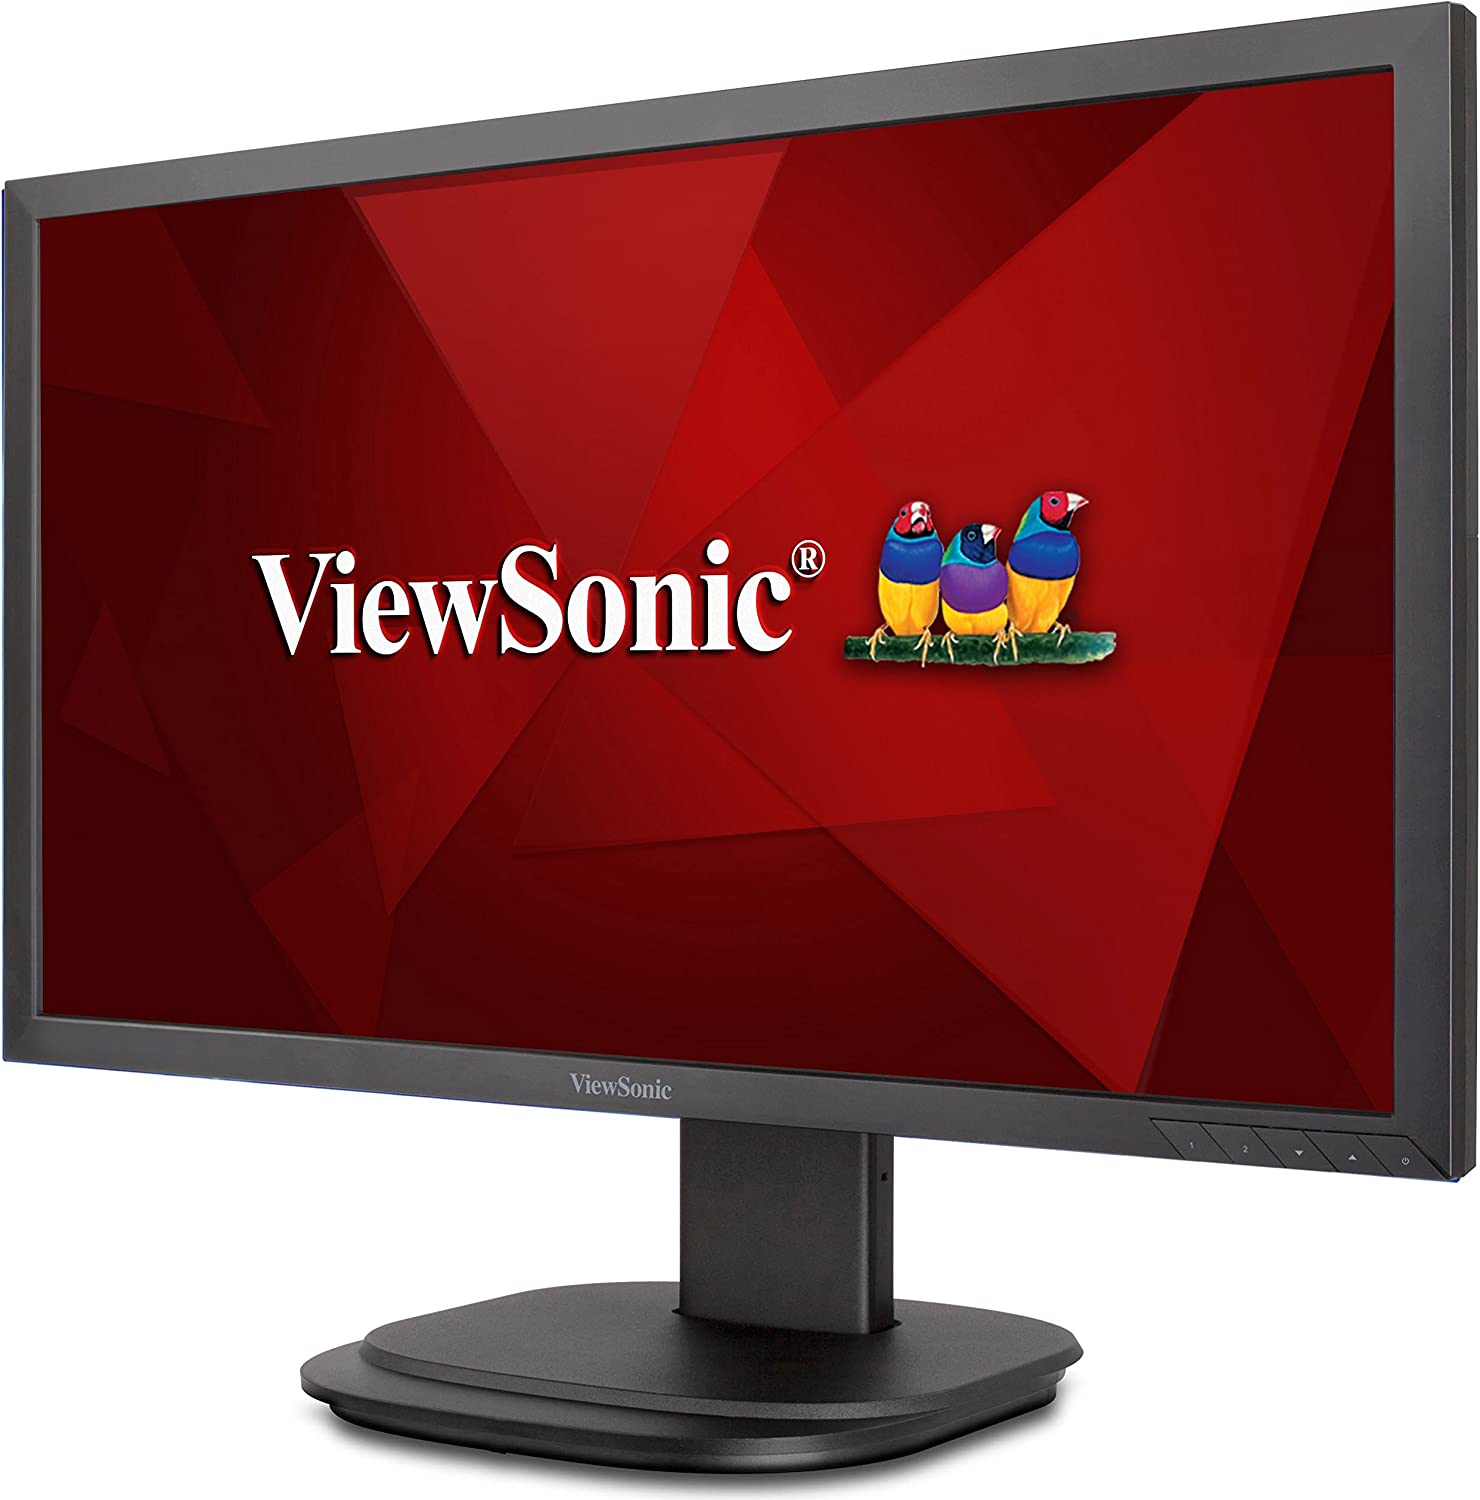 ViewSonic VG2239SMH-2-R 22" LCD Ergonomic Monitor for Home and Office - Certified Refurbished